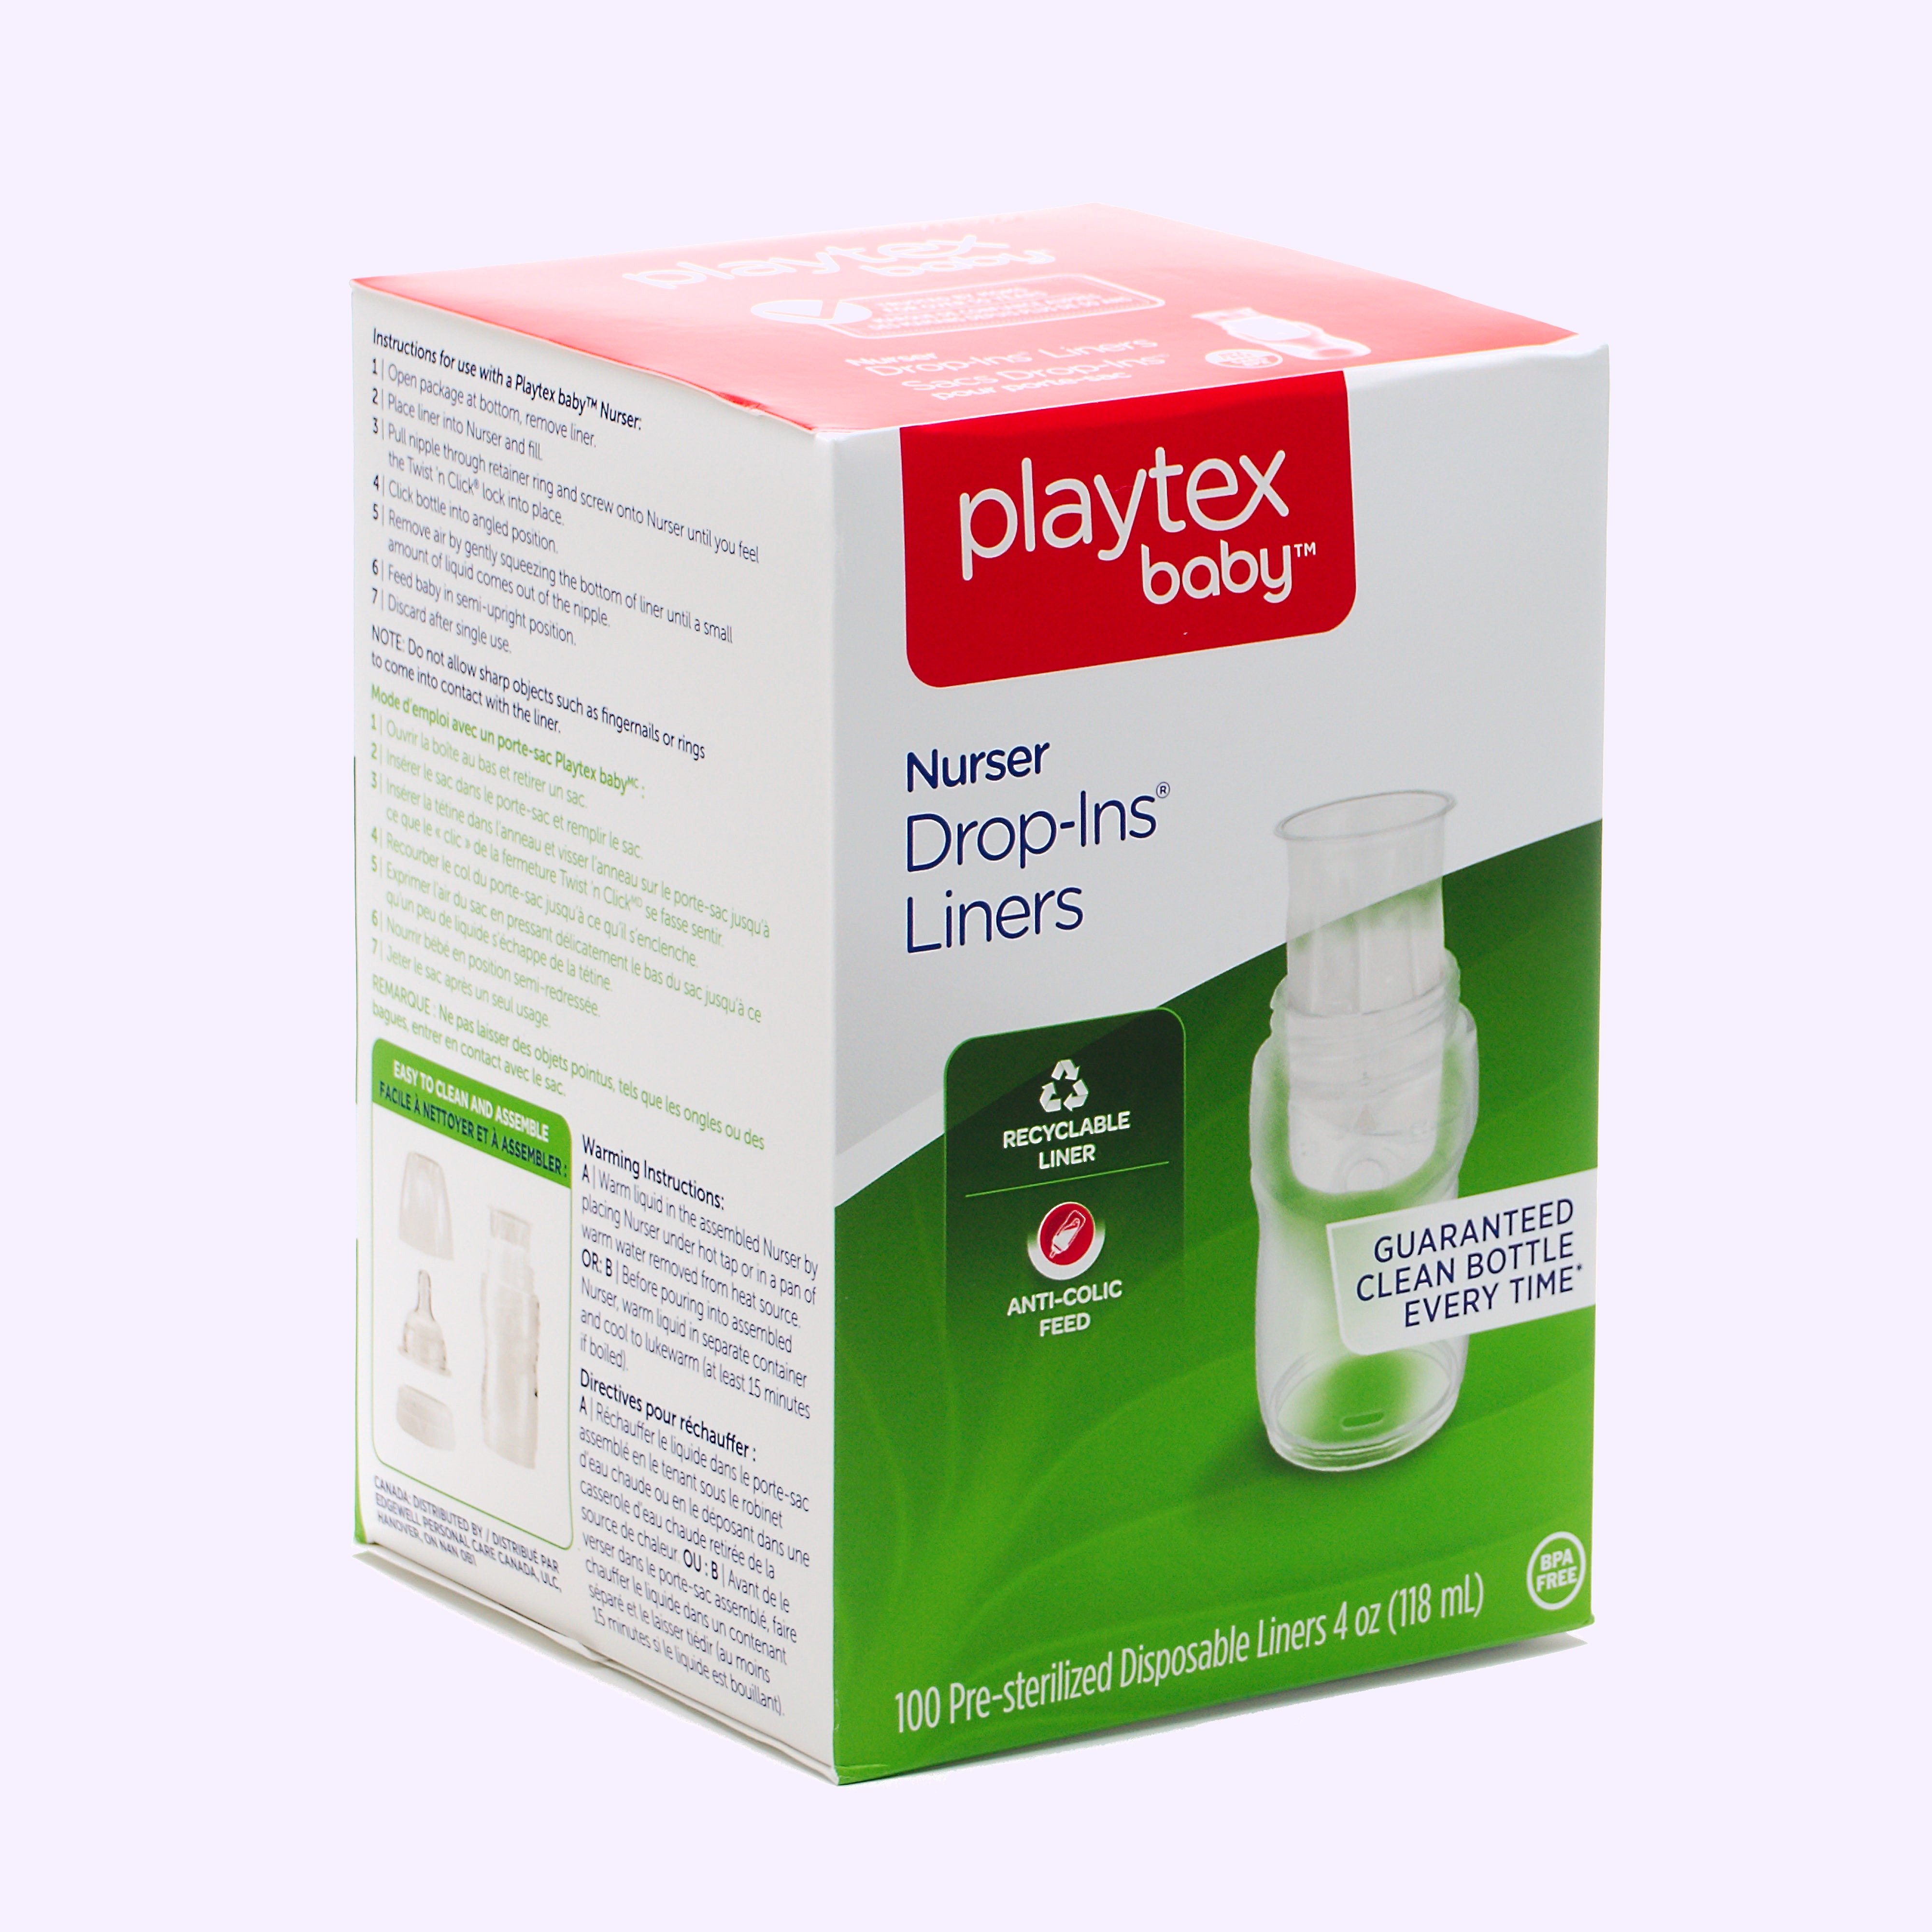 Playtex products » Compare prices and see offers now